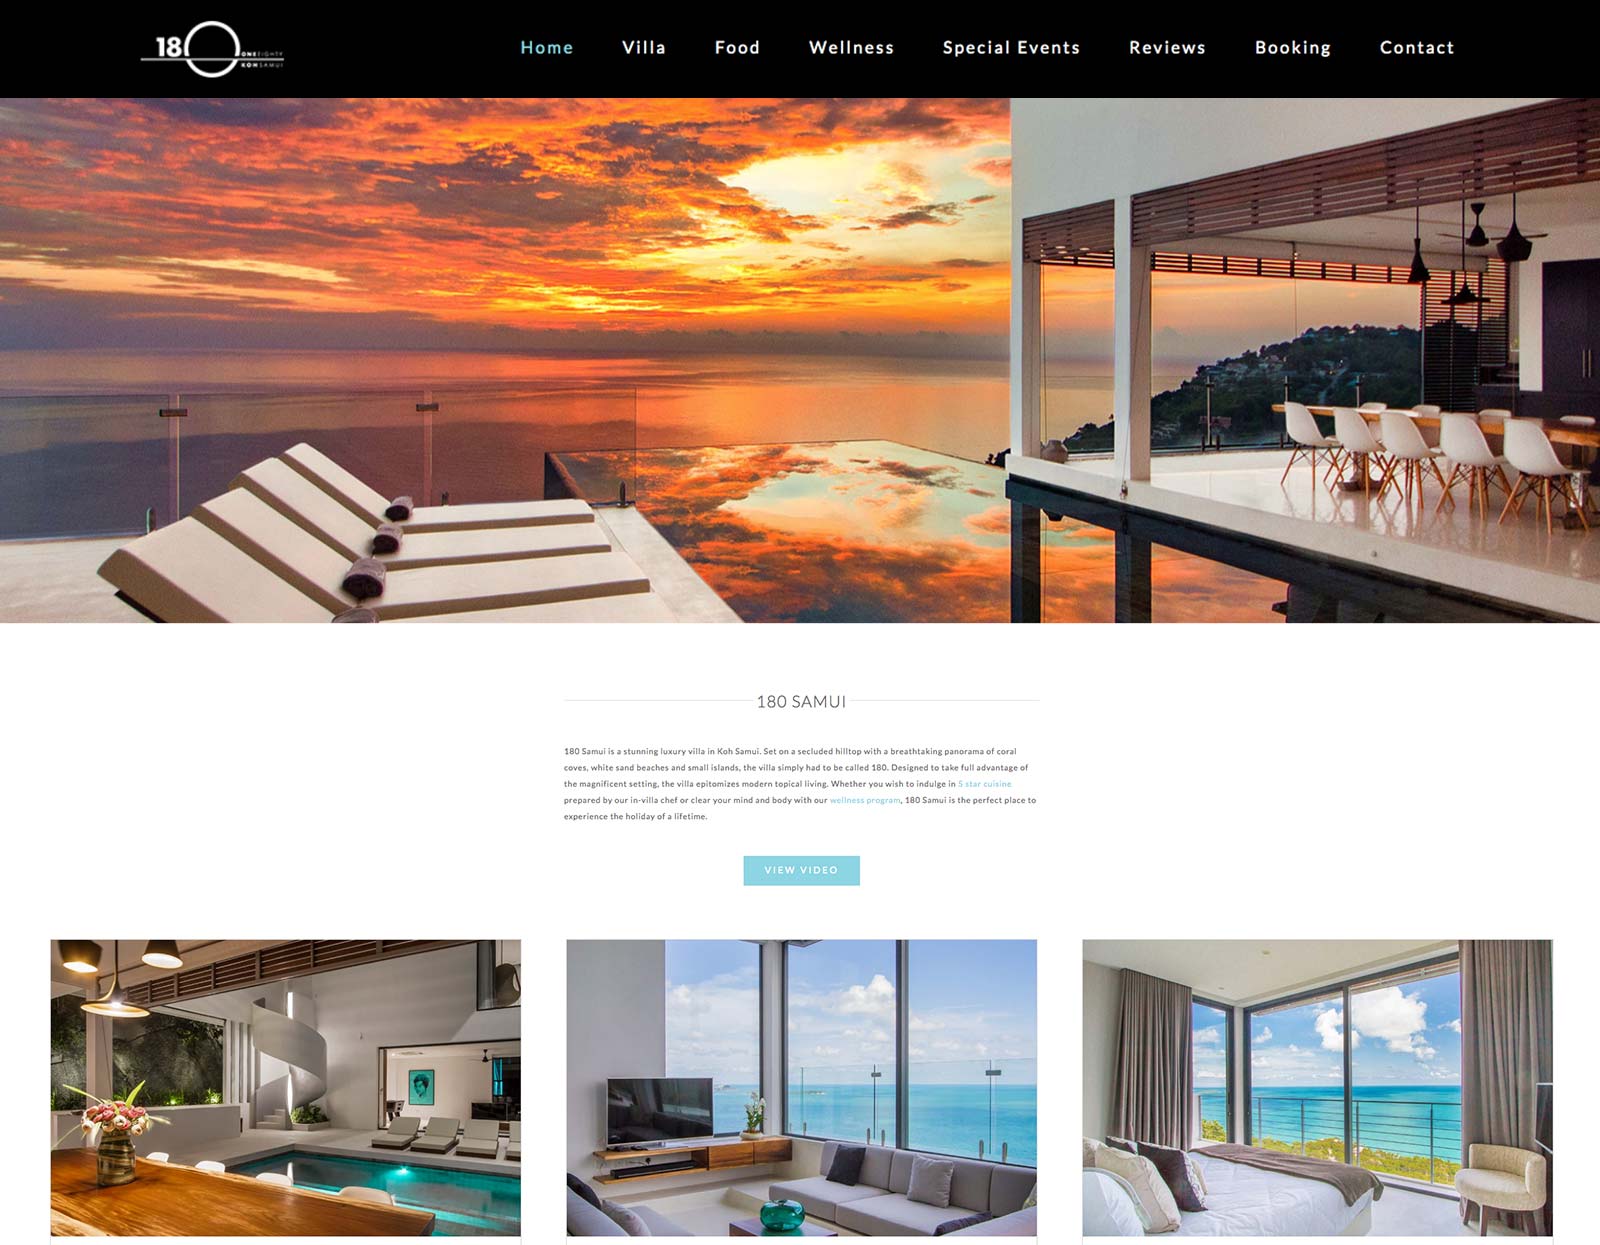 Image of web design for 180 Samui, showing the website home page.